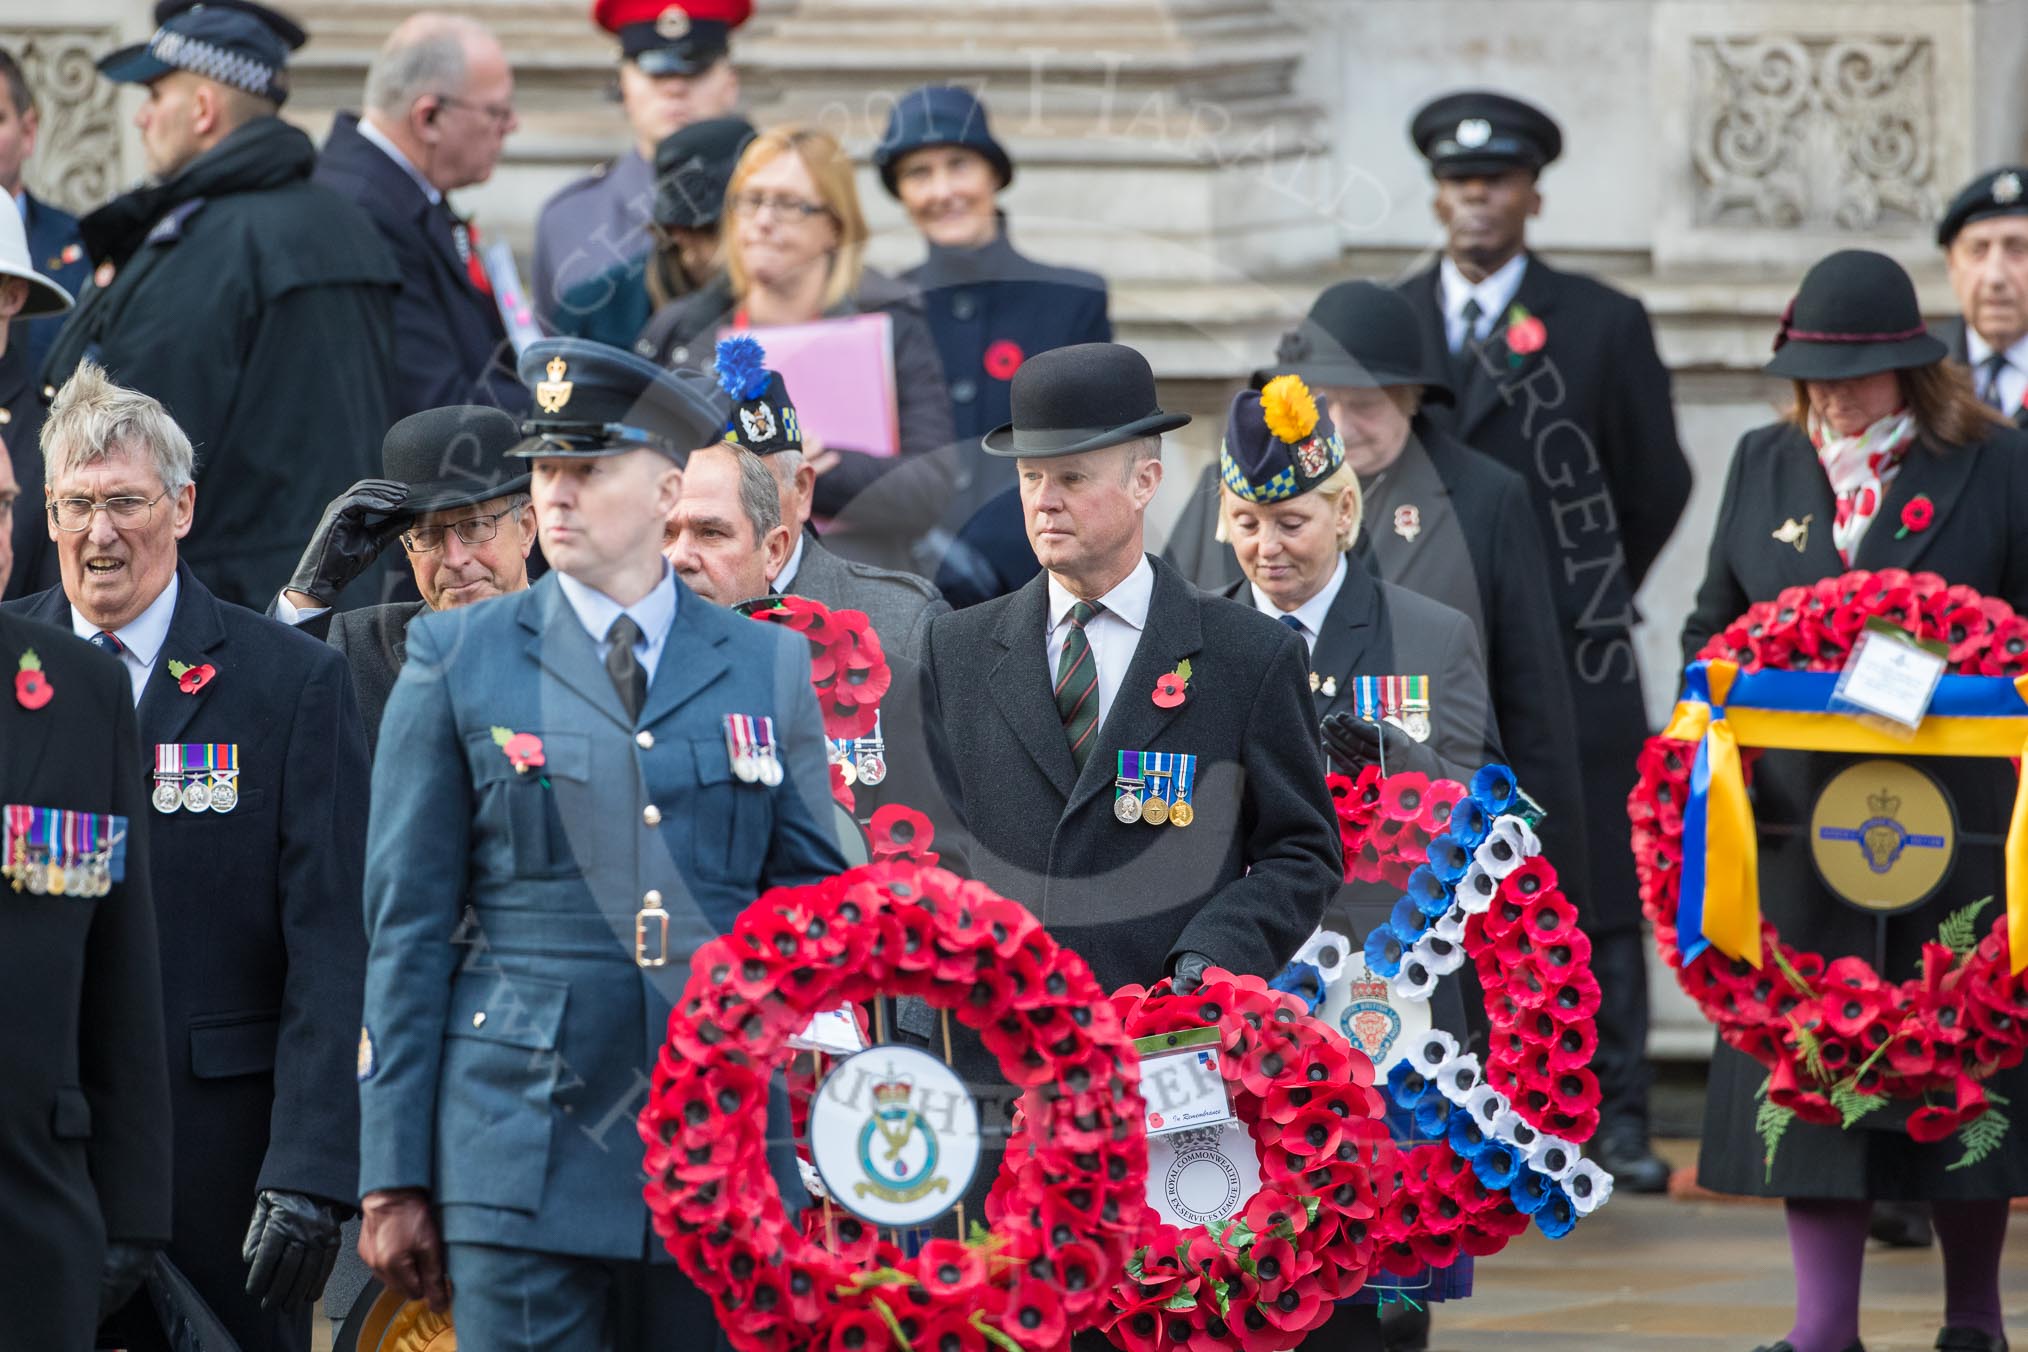 Air Marshal Sir Baz North, President of the Royal Air Forces Association  and representatives of The Royal British Legion, London Transport, the Royal Naval Association , the Royal Commonwealth Ex­Services League, the Royal British Legion Scotland, and the Royal British Legion Women’s Section leaving the Foreign and Commonwealth Office before the Remembrance Sunday Cenotaph Ceremony 2018 at Horse Guards Parade, Westminster, London, 11 November 2018, 10:35.